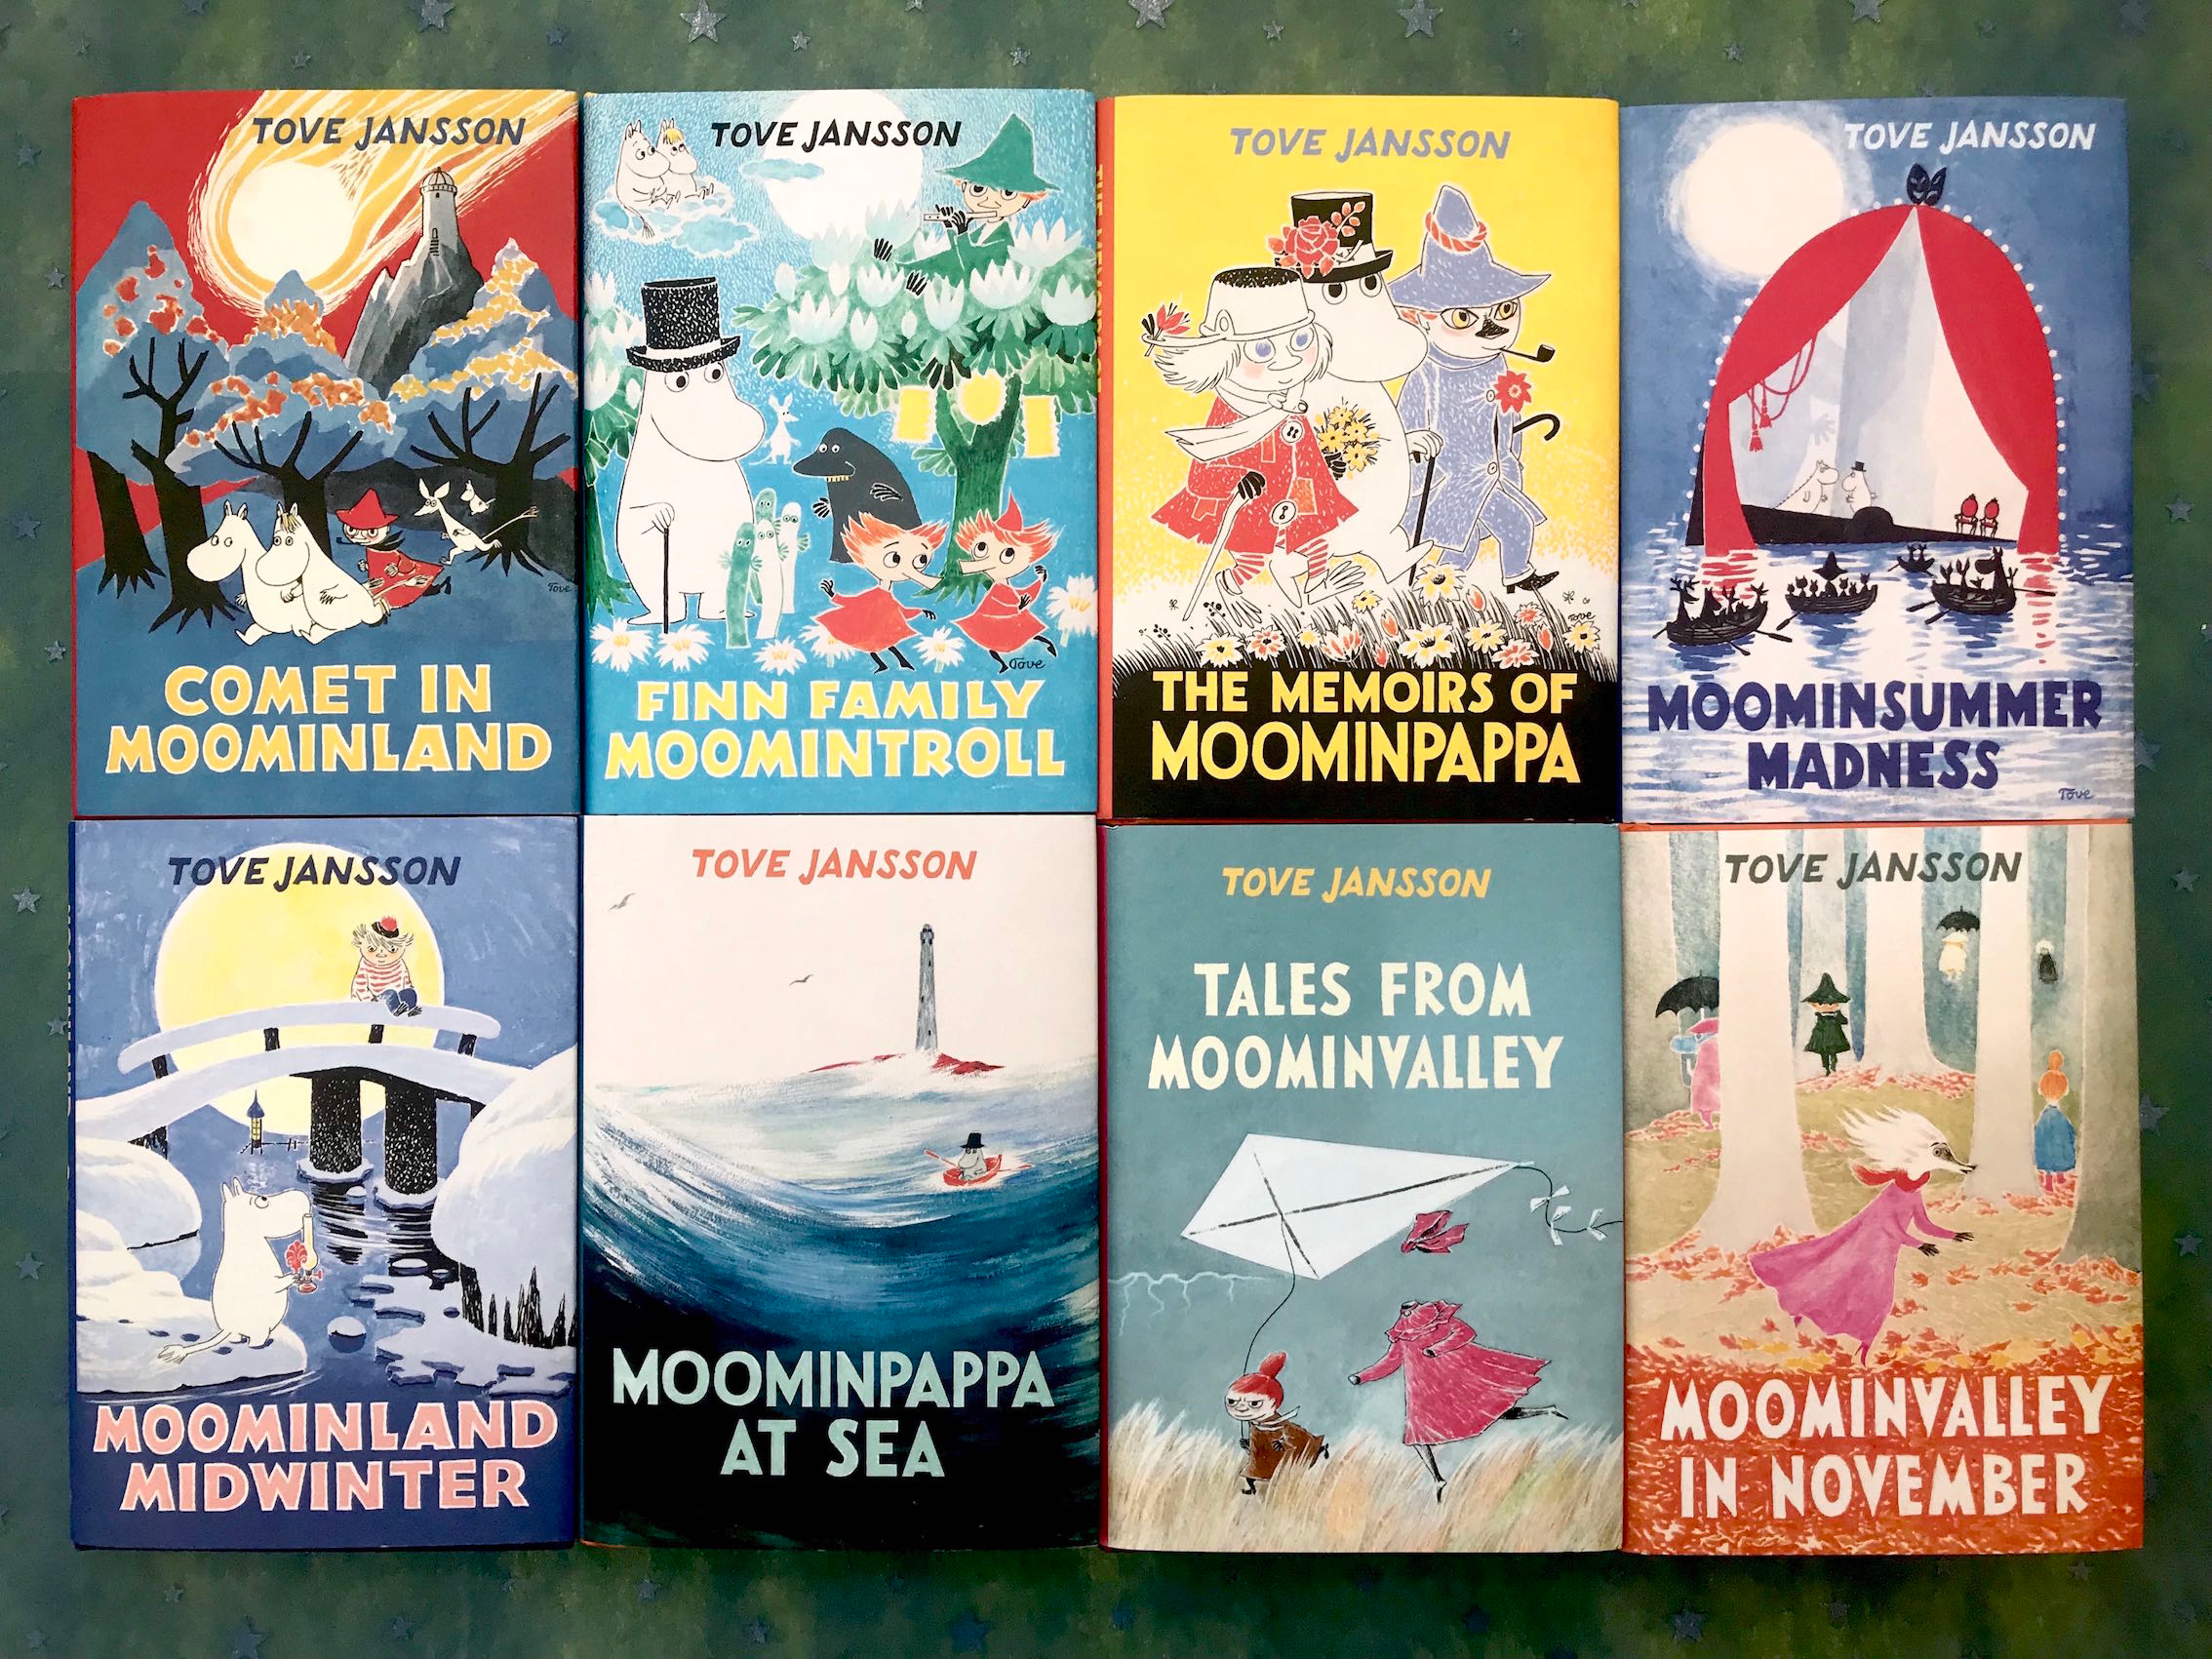 Tove-Jansson-Moomin-Books-Collection-5.jpg